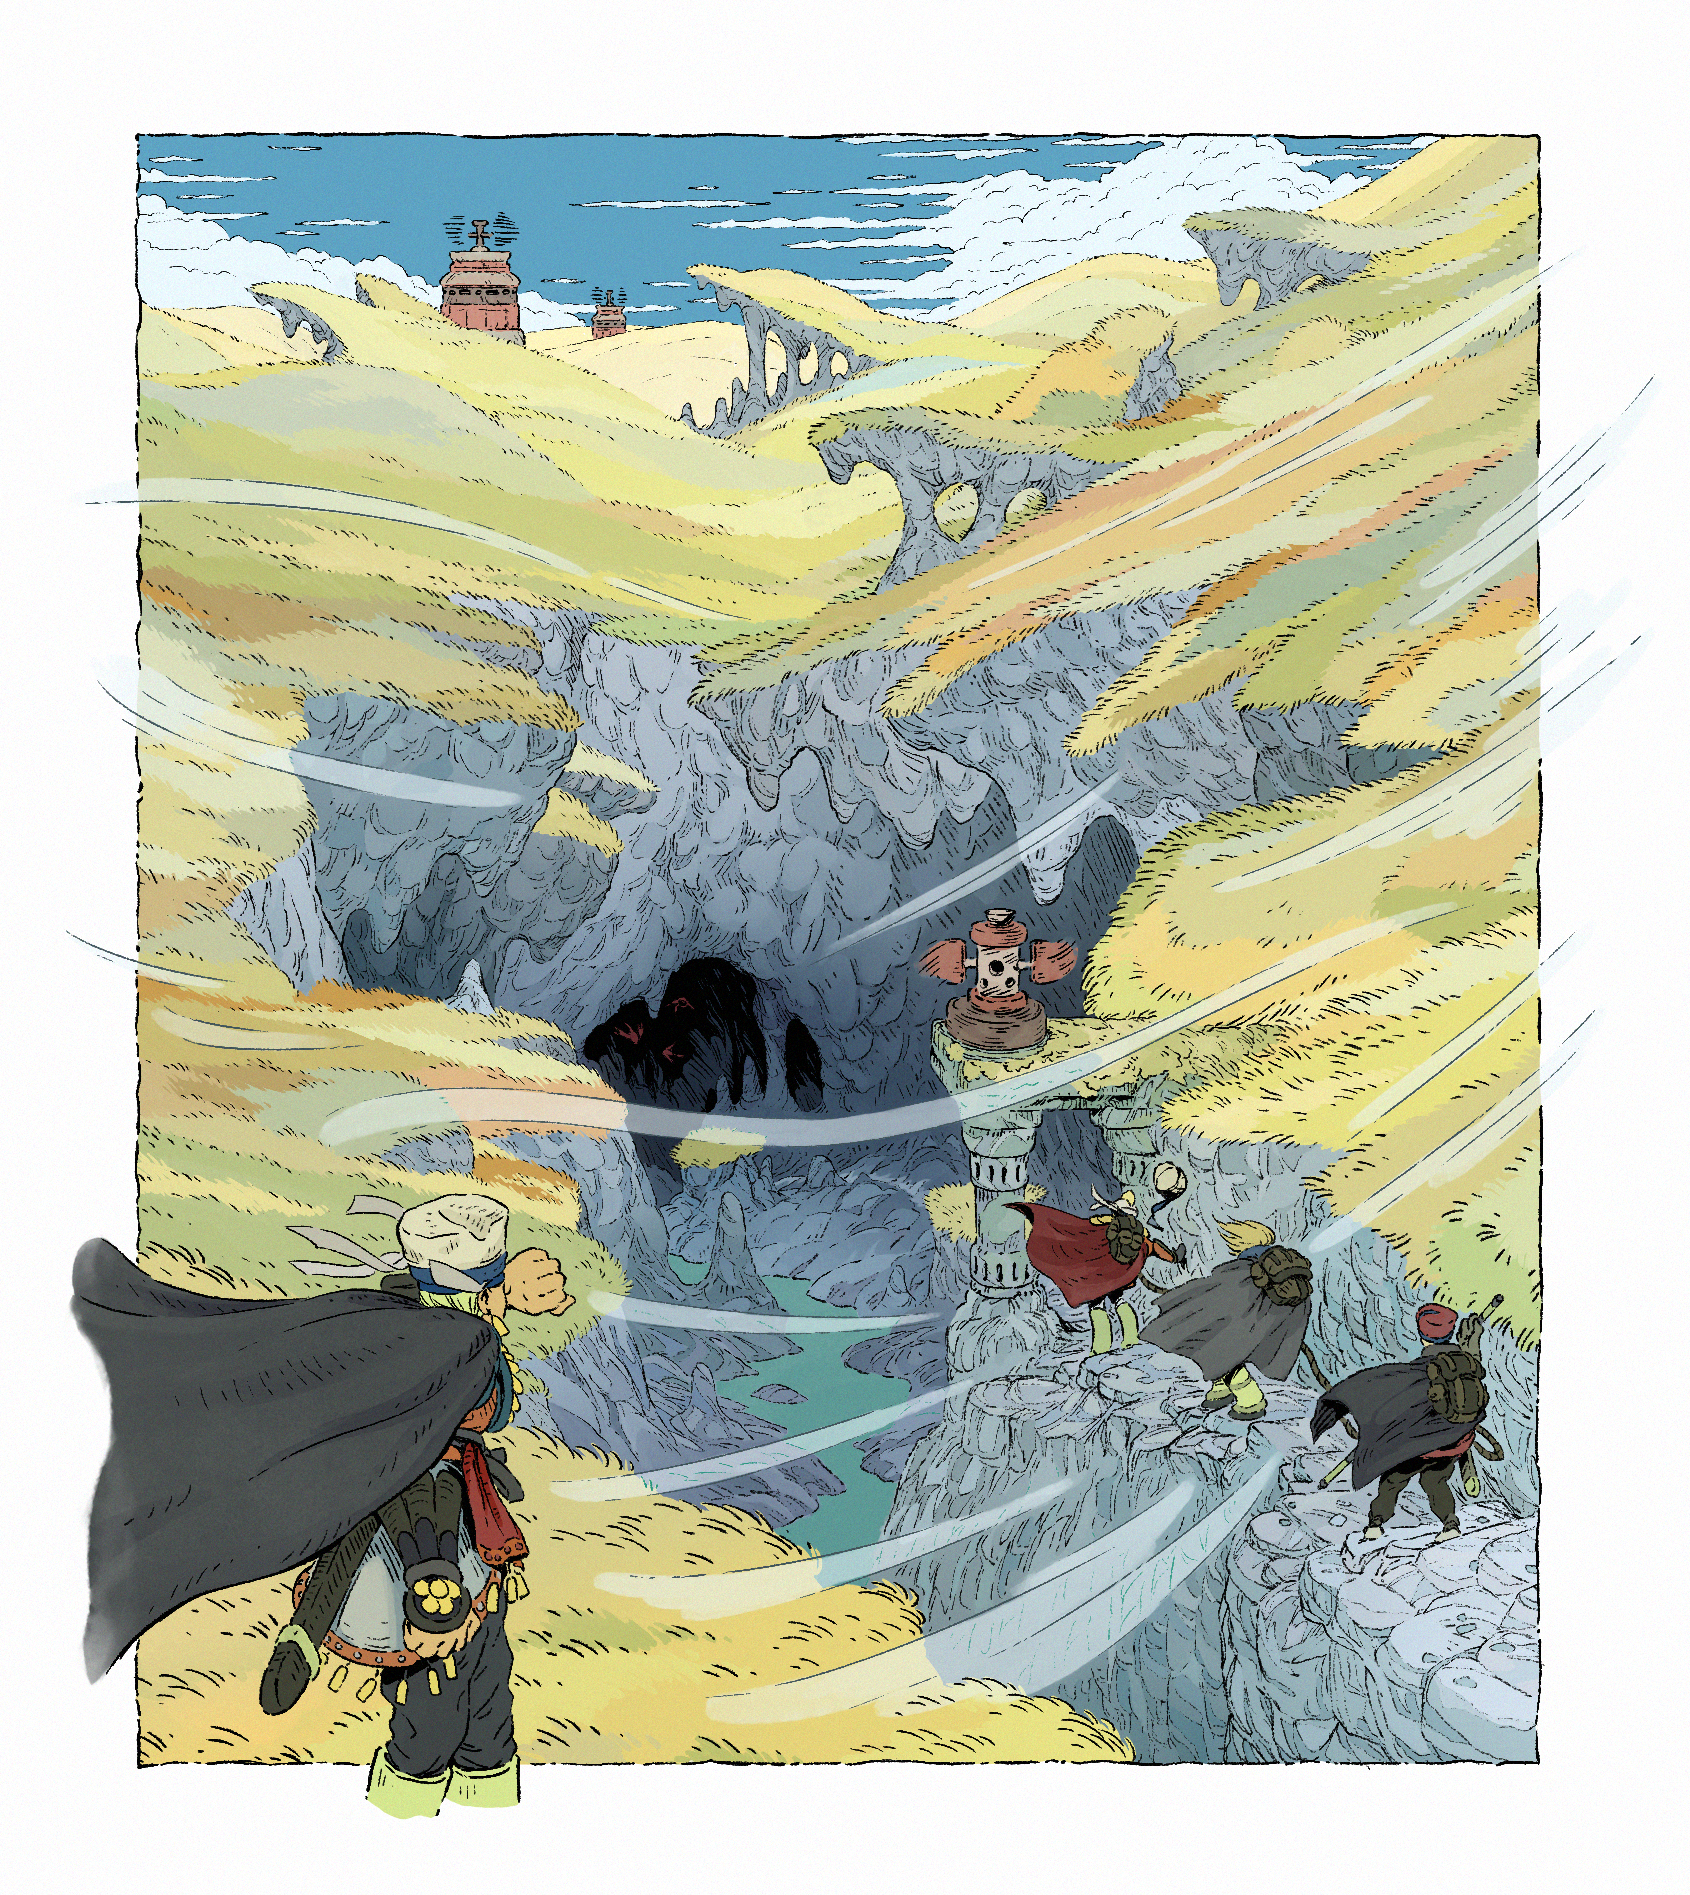 One adventurer watches three others walk along a perilous cliffside path as they descend through a canyon toward the mouth of a mysterious cavern.